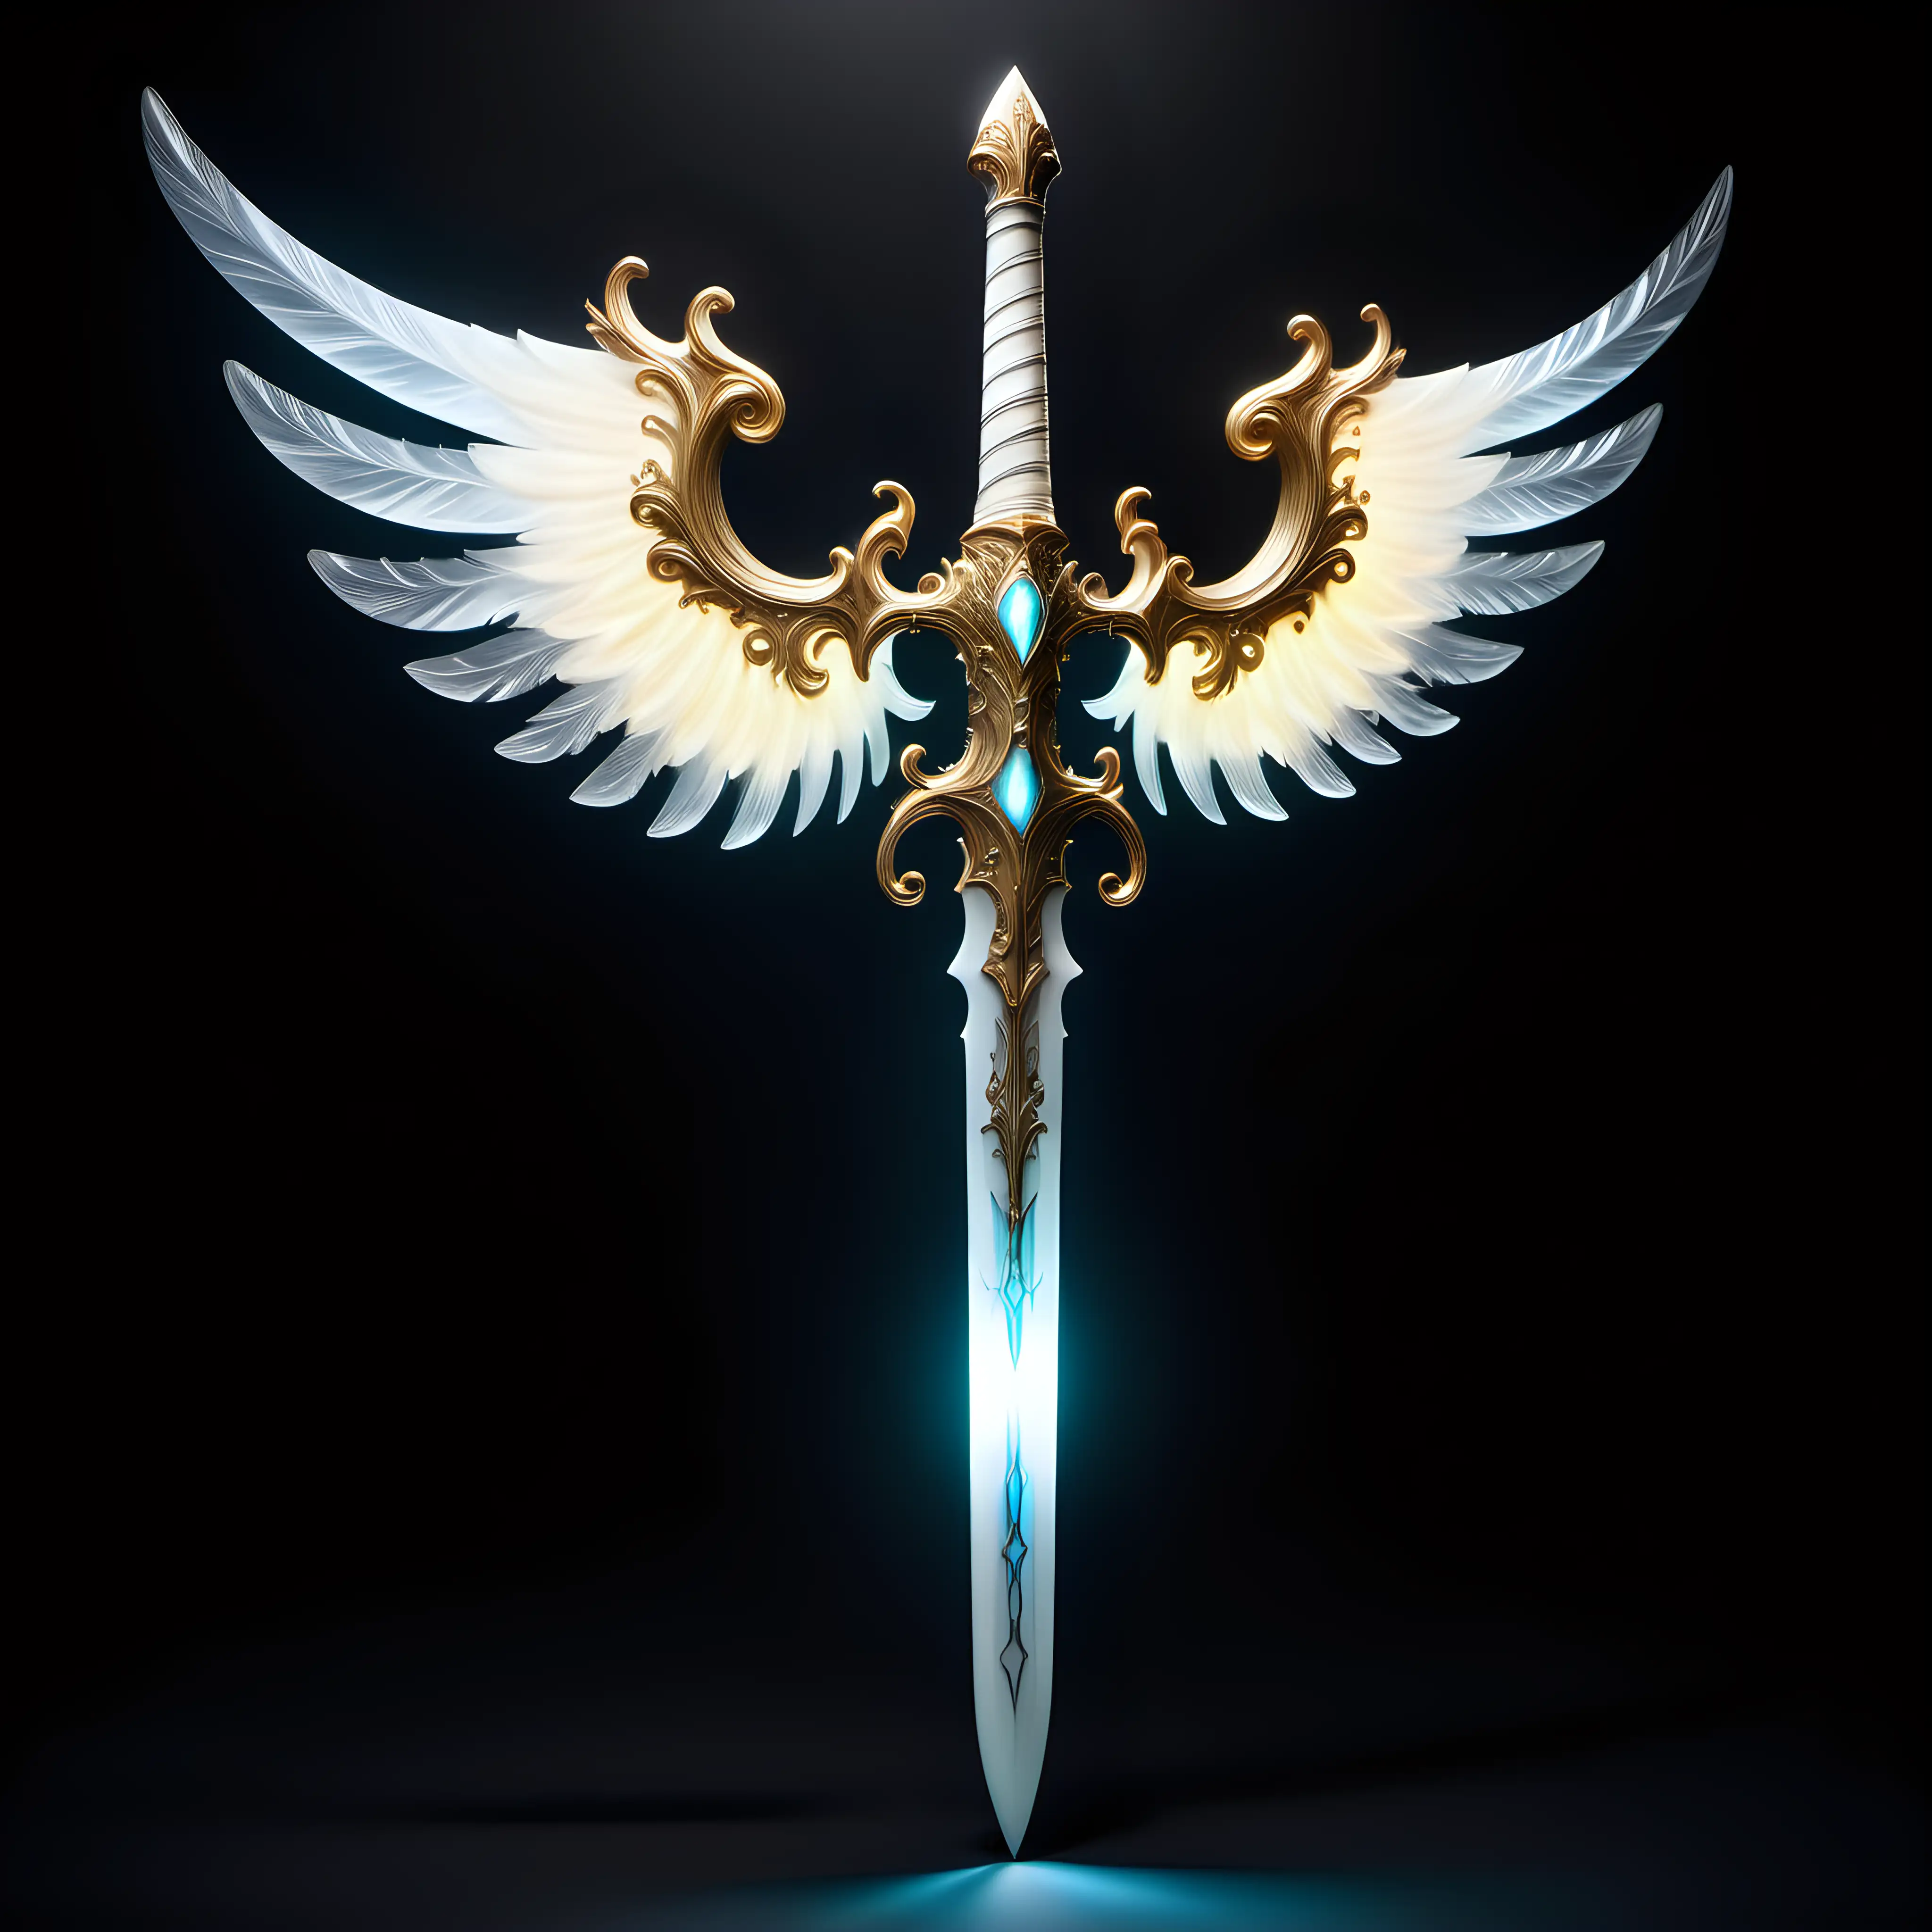 A luminous, glowing alabaster sword with golden streaks and silver accents streaking through wind wisps with its winged guard